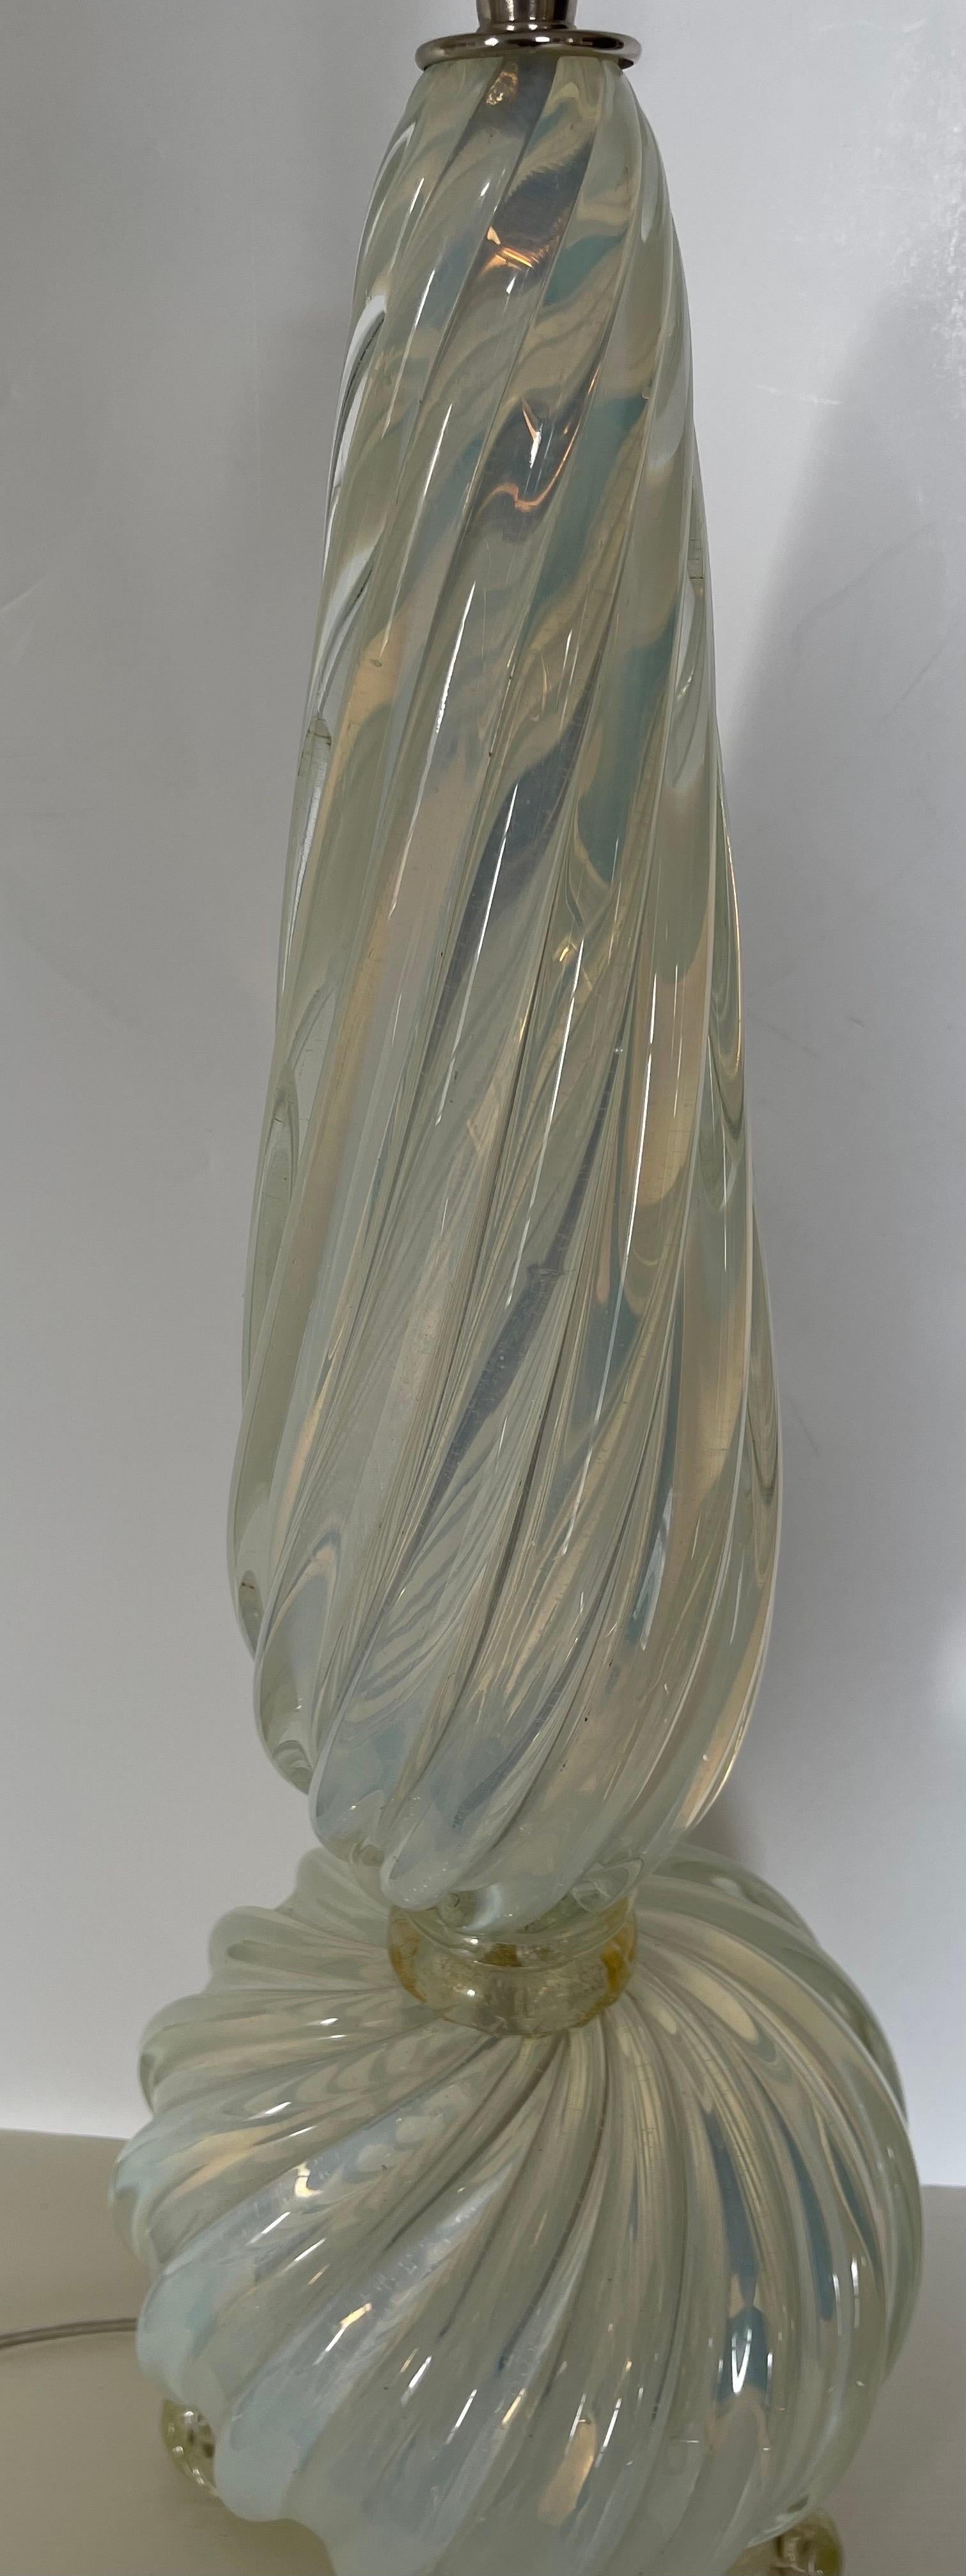 Pair of Mid-Century Opalescent Murano Glass Lamps For Sale 2